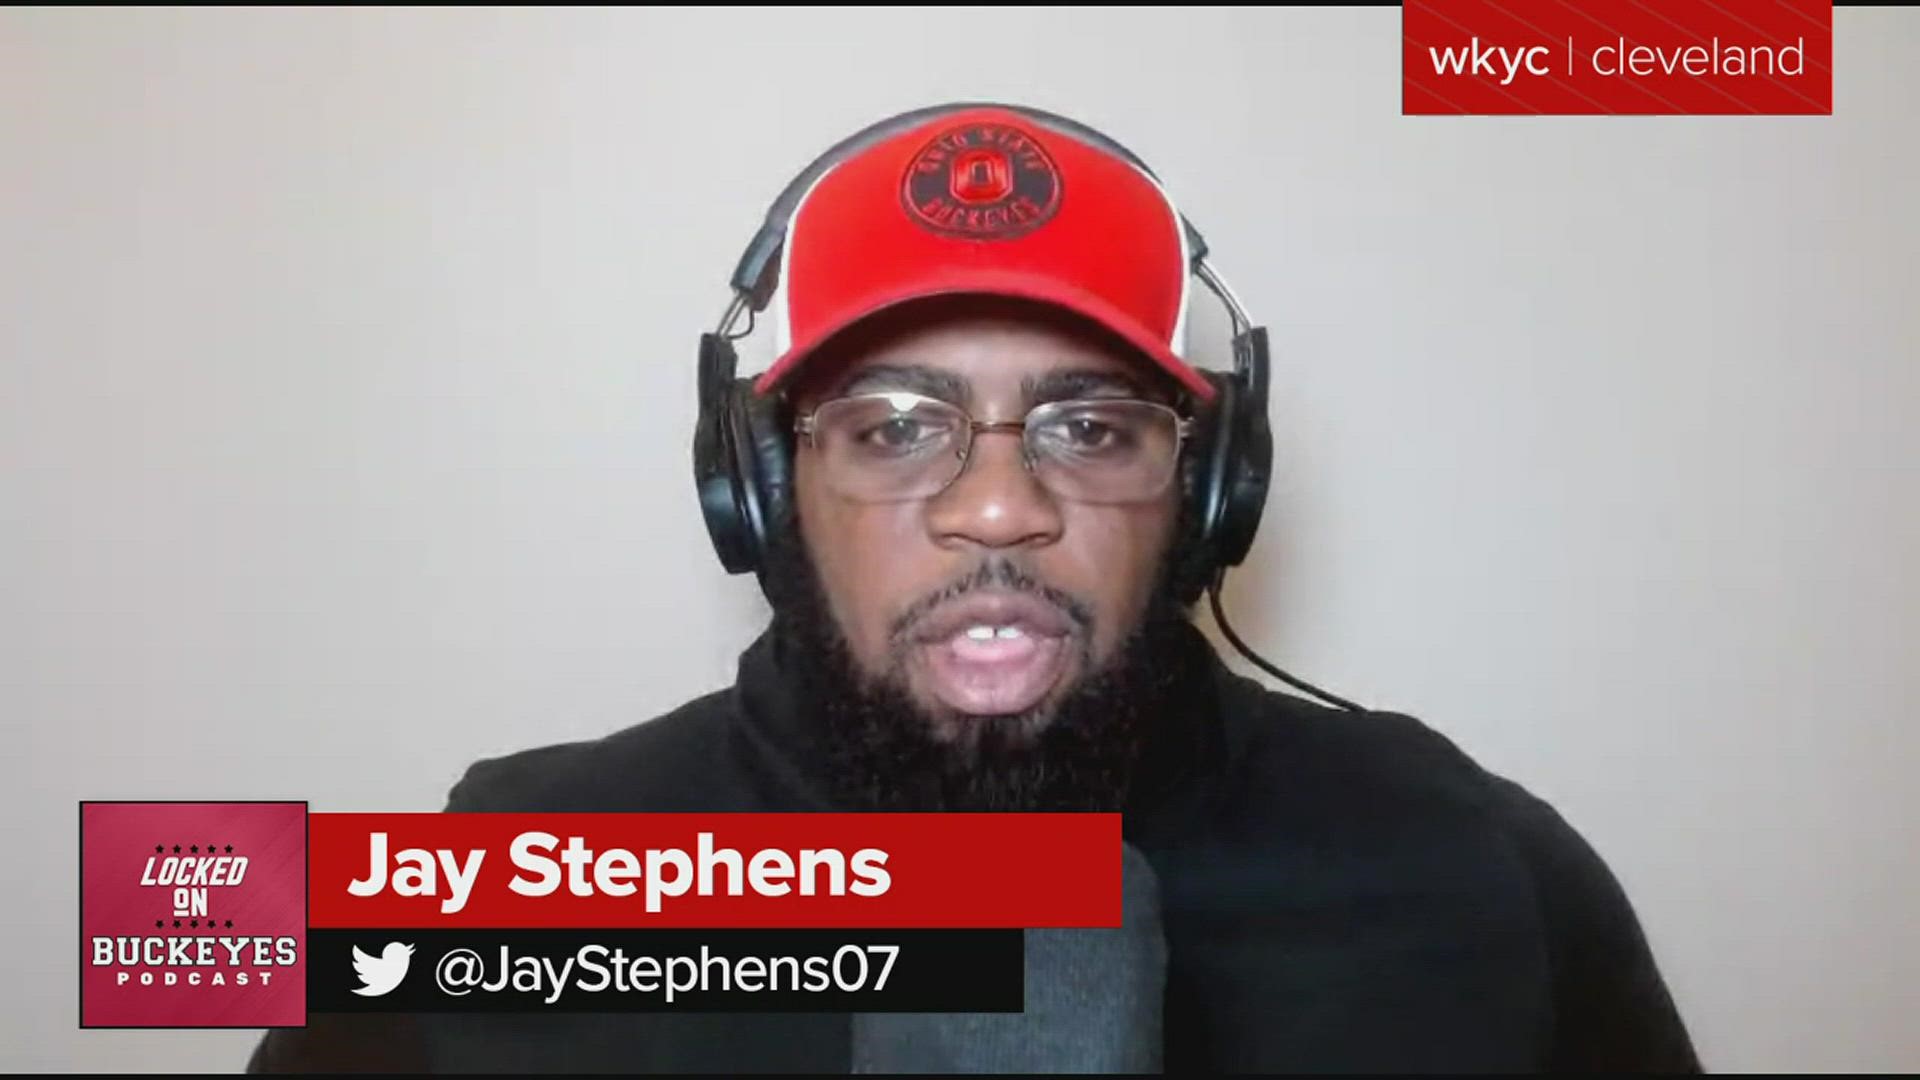 Jay Stephens discusses Kerry Coombs' first press conference since losing his play-calling duties as Ohio State's defensive coordinator.